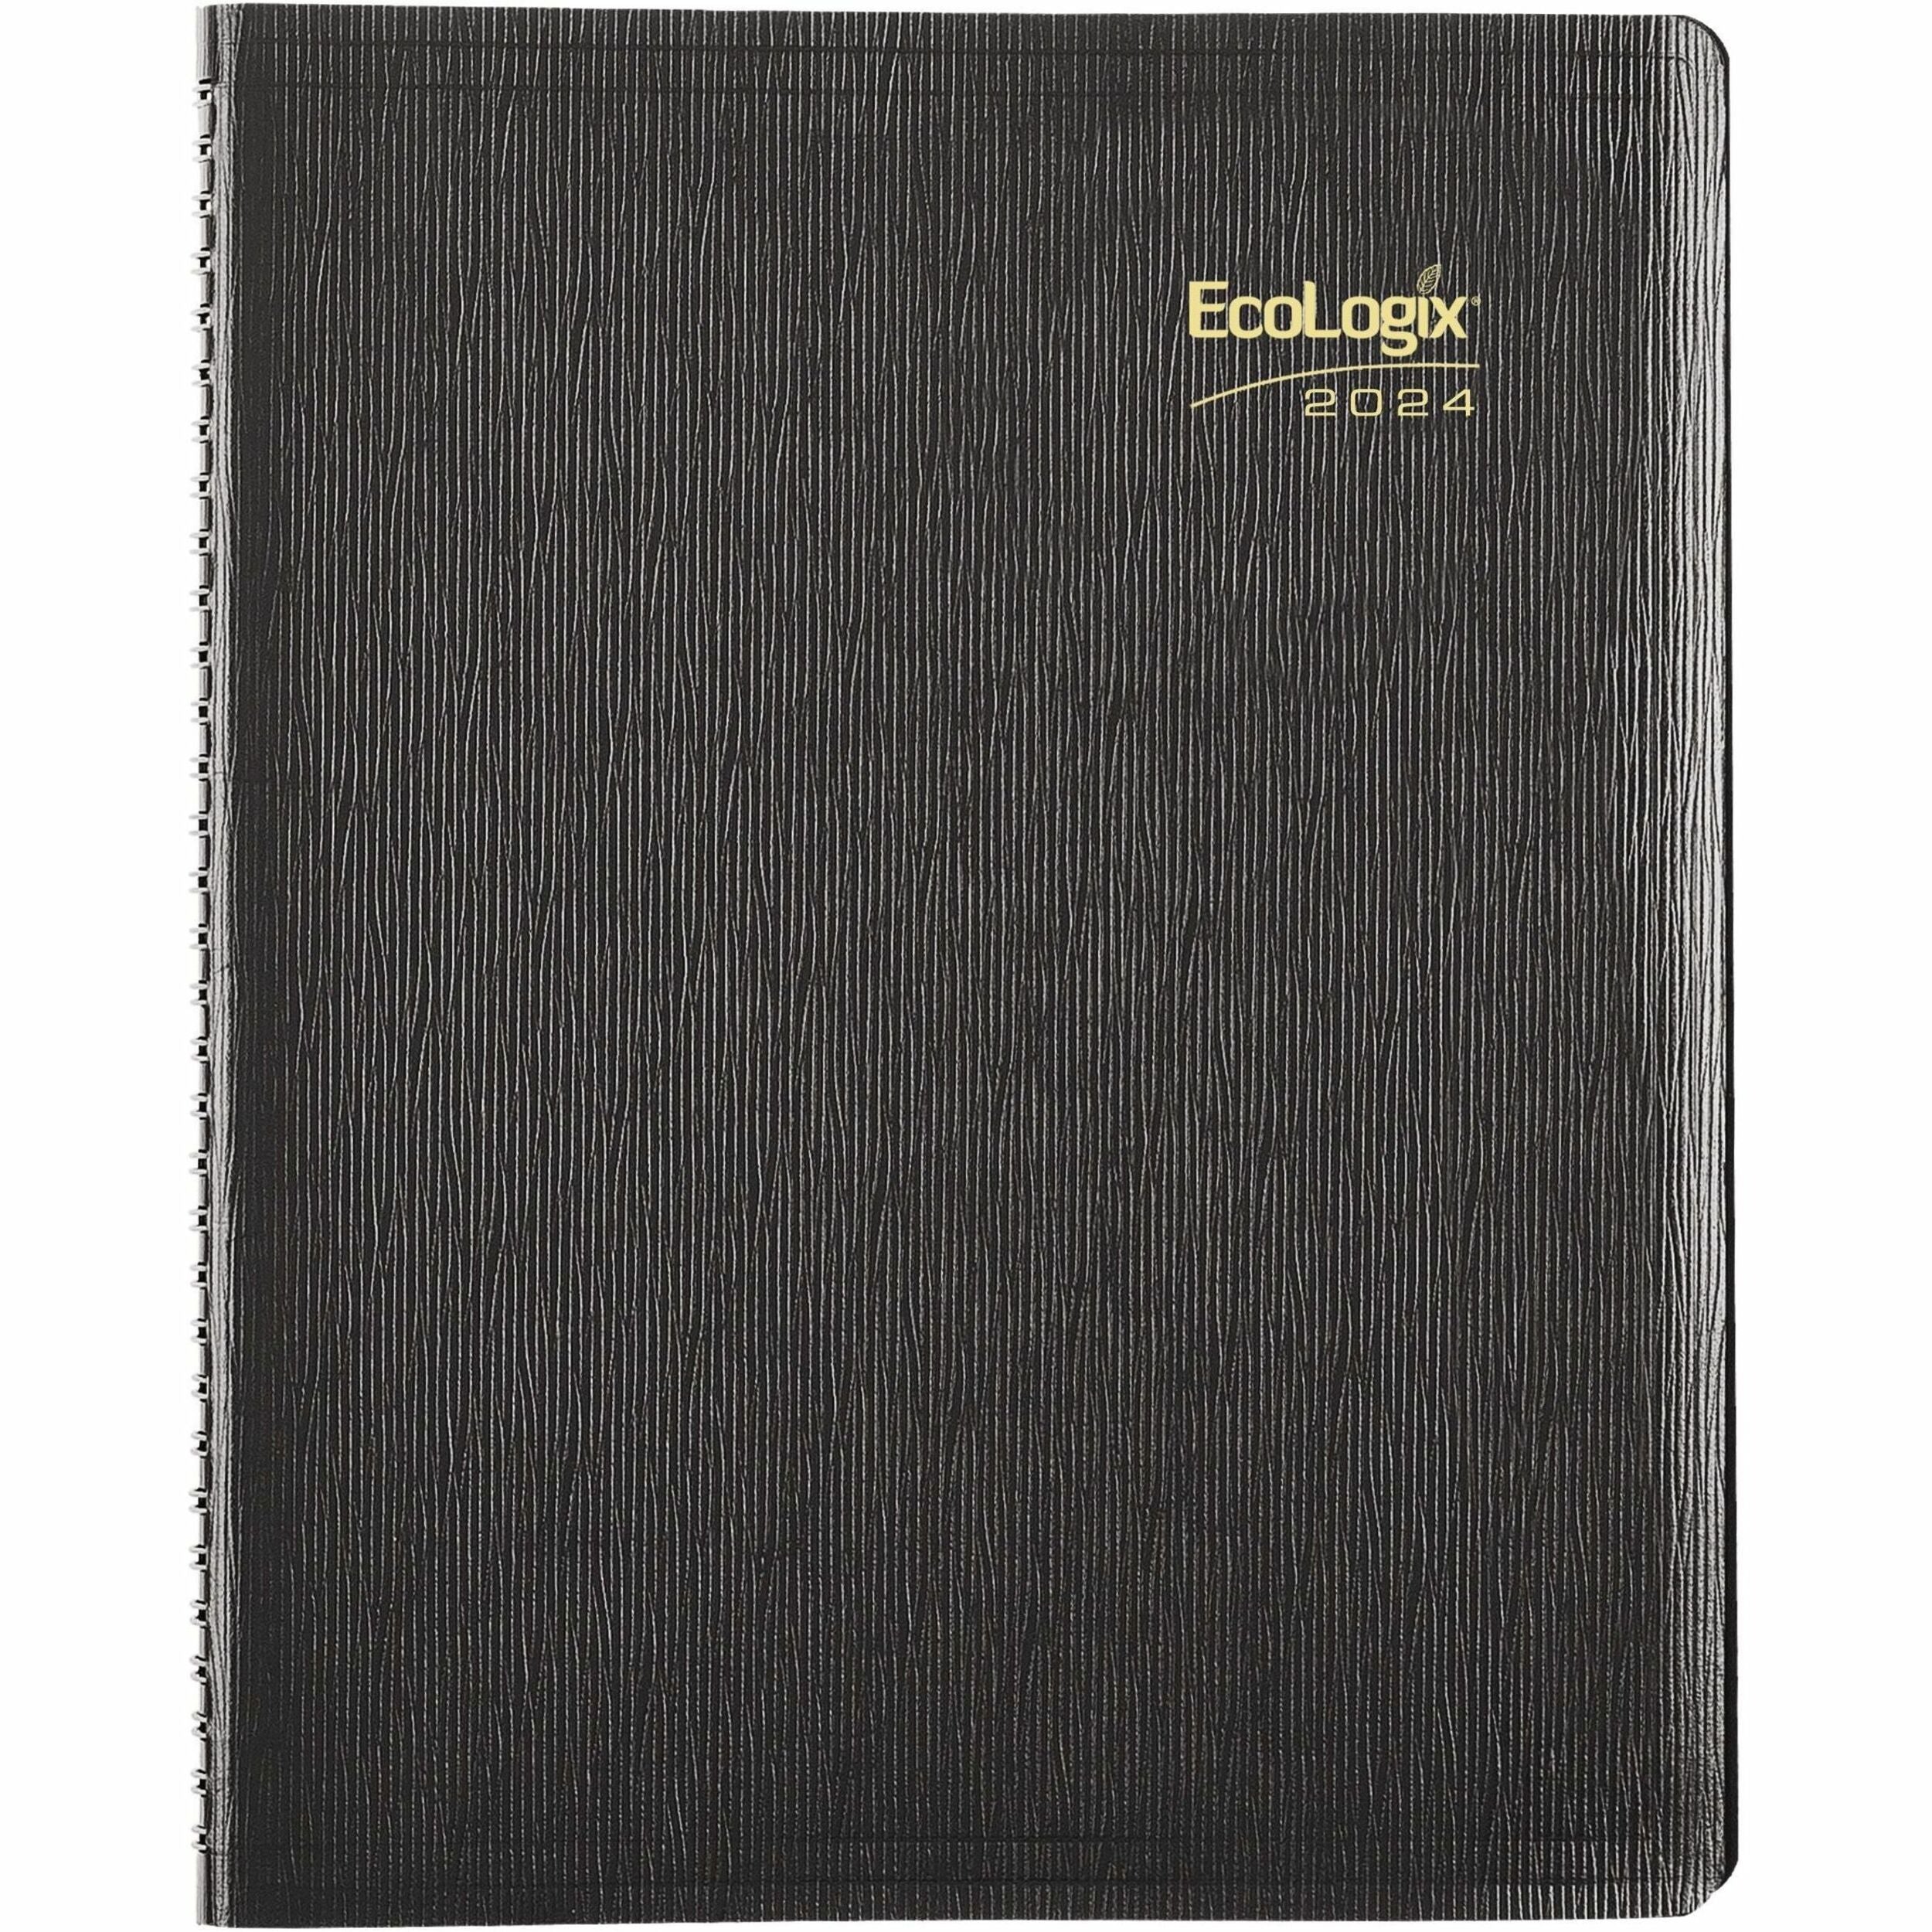 blueline-recycled-ecologix-weekly-planners-julian-dates-weekly-12-month-january-2024-december-2024-700-am-to-845-pm-quarter-hourly-700-am-to-545-pm-quarter-hourly-1-week-double-page-layout-8-1-2-x-11-sheet-size-twin-wire_redcb425wblk - 1